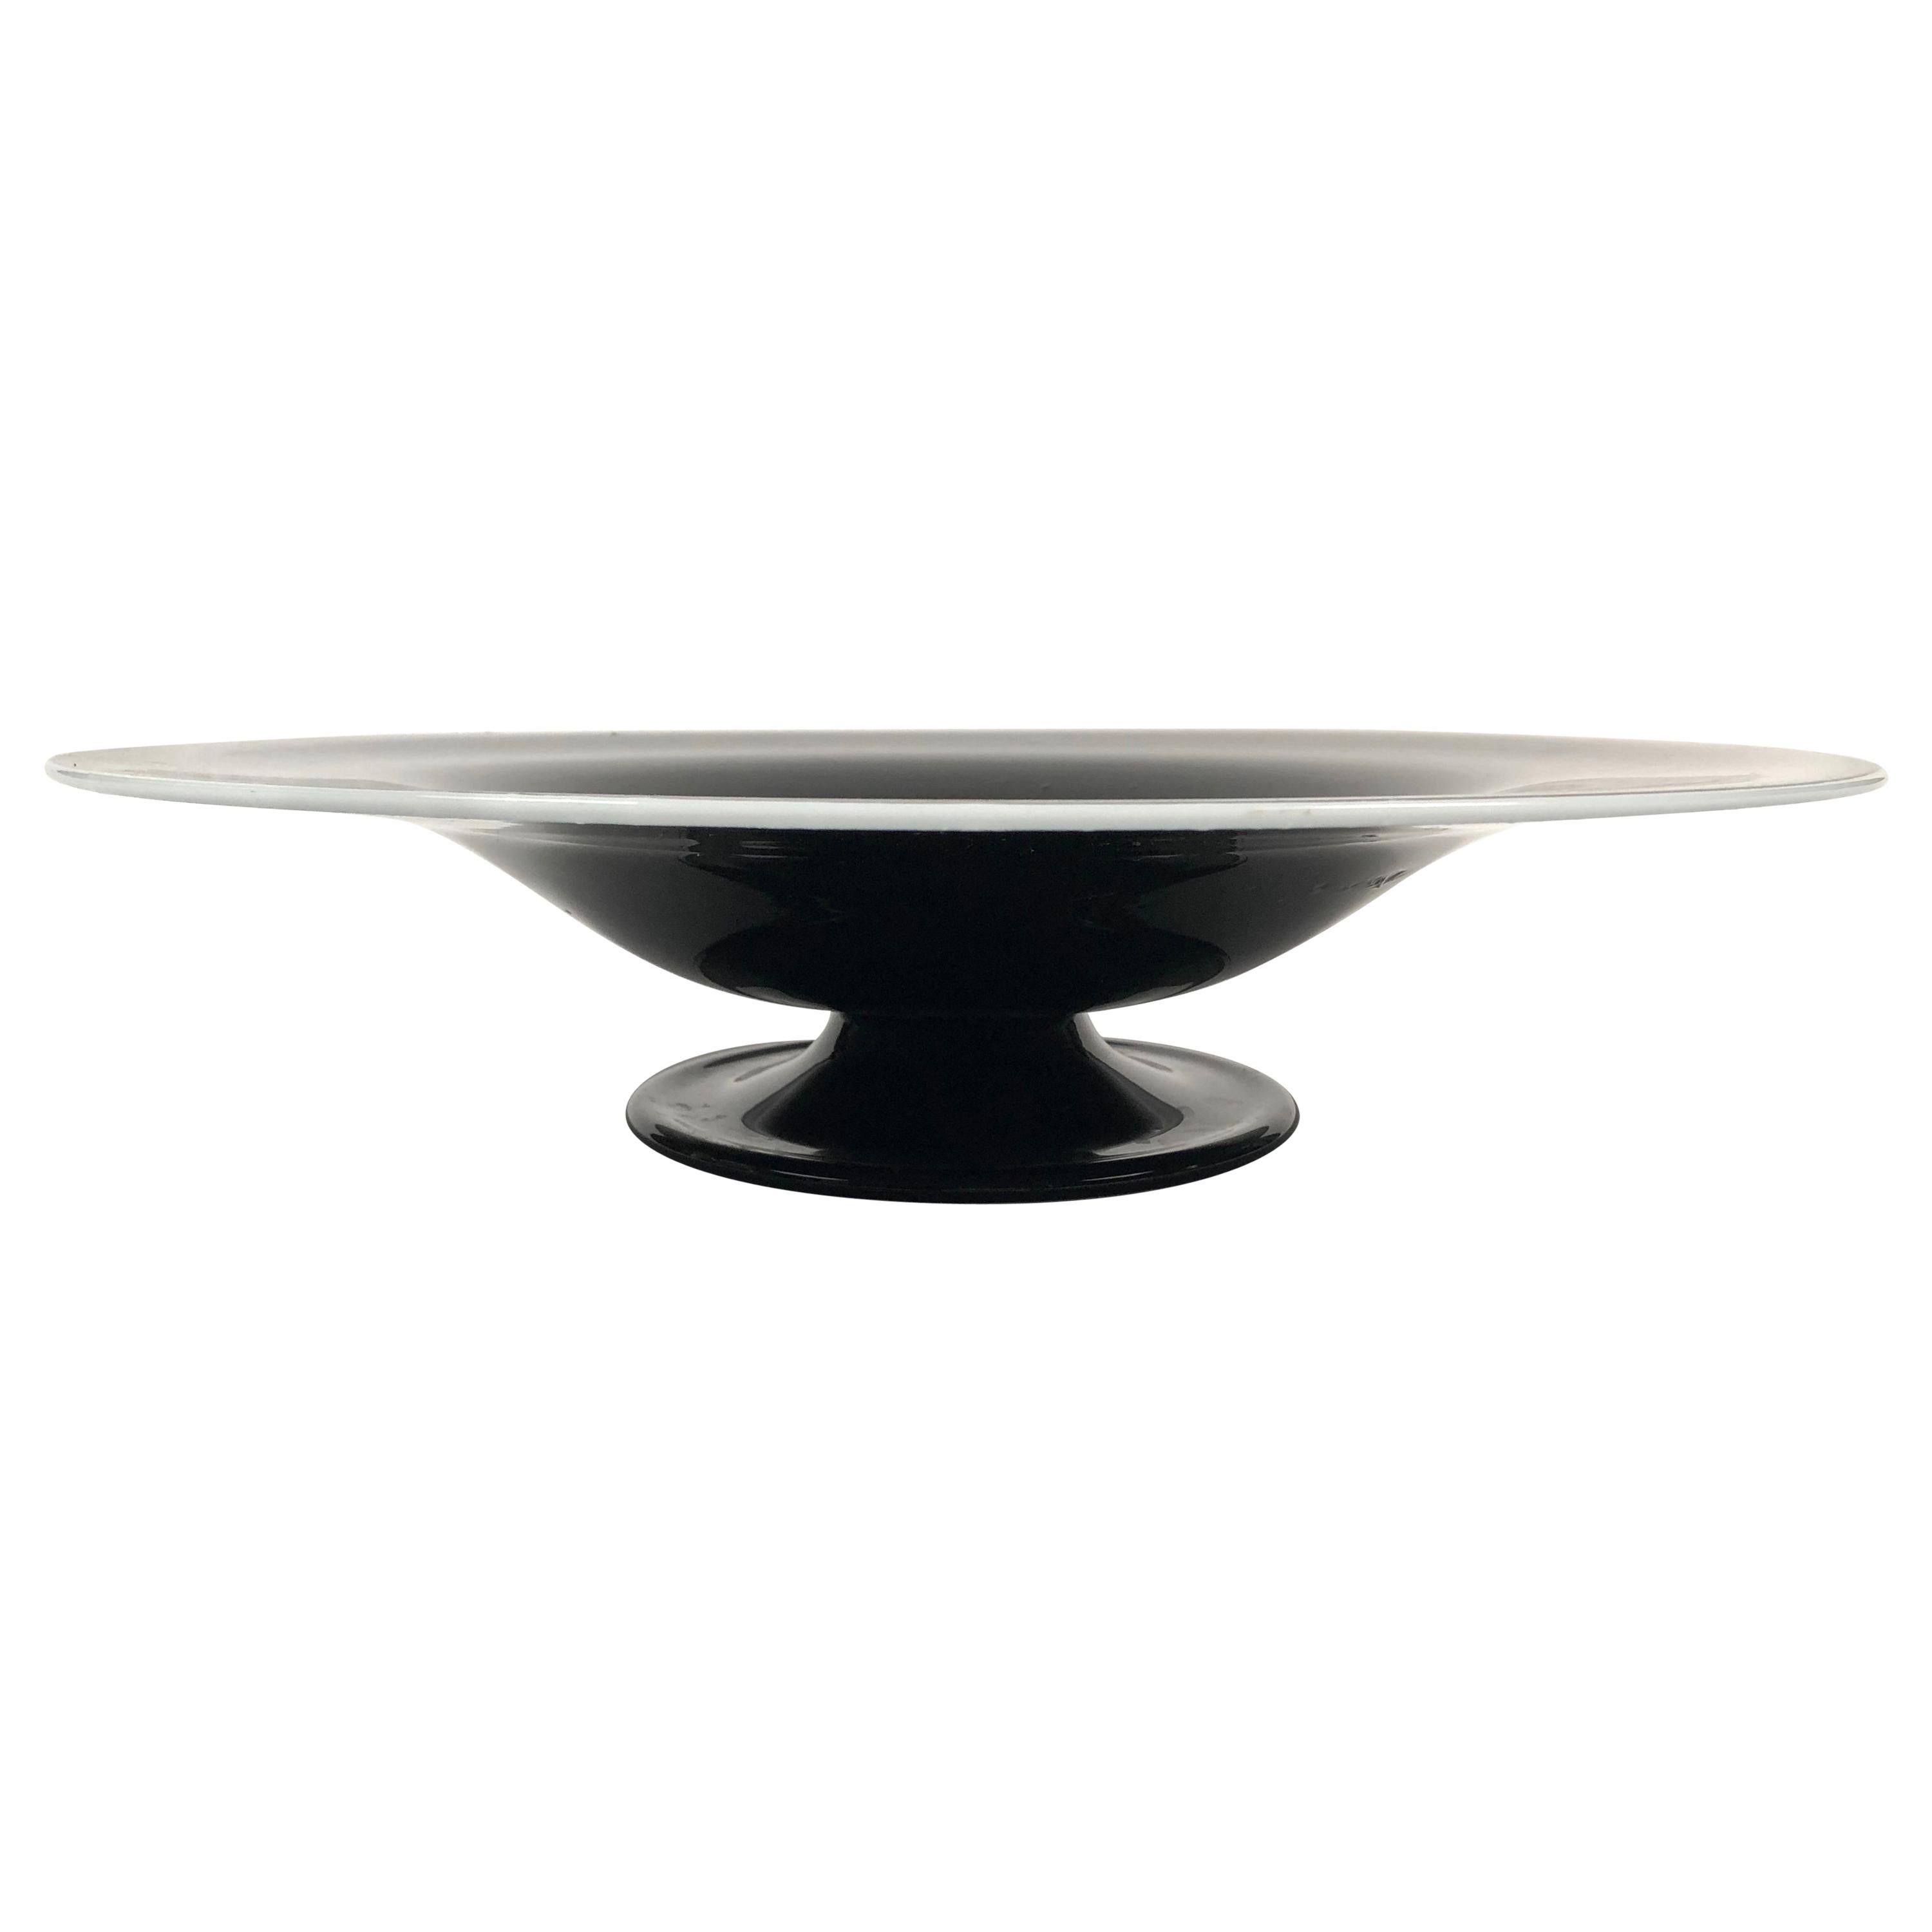 Large Black and White Italian Blown Glass Footed Bowl